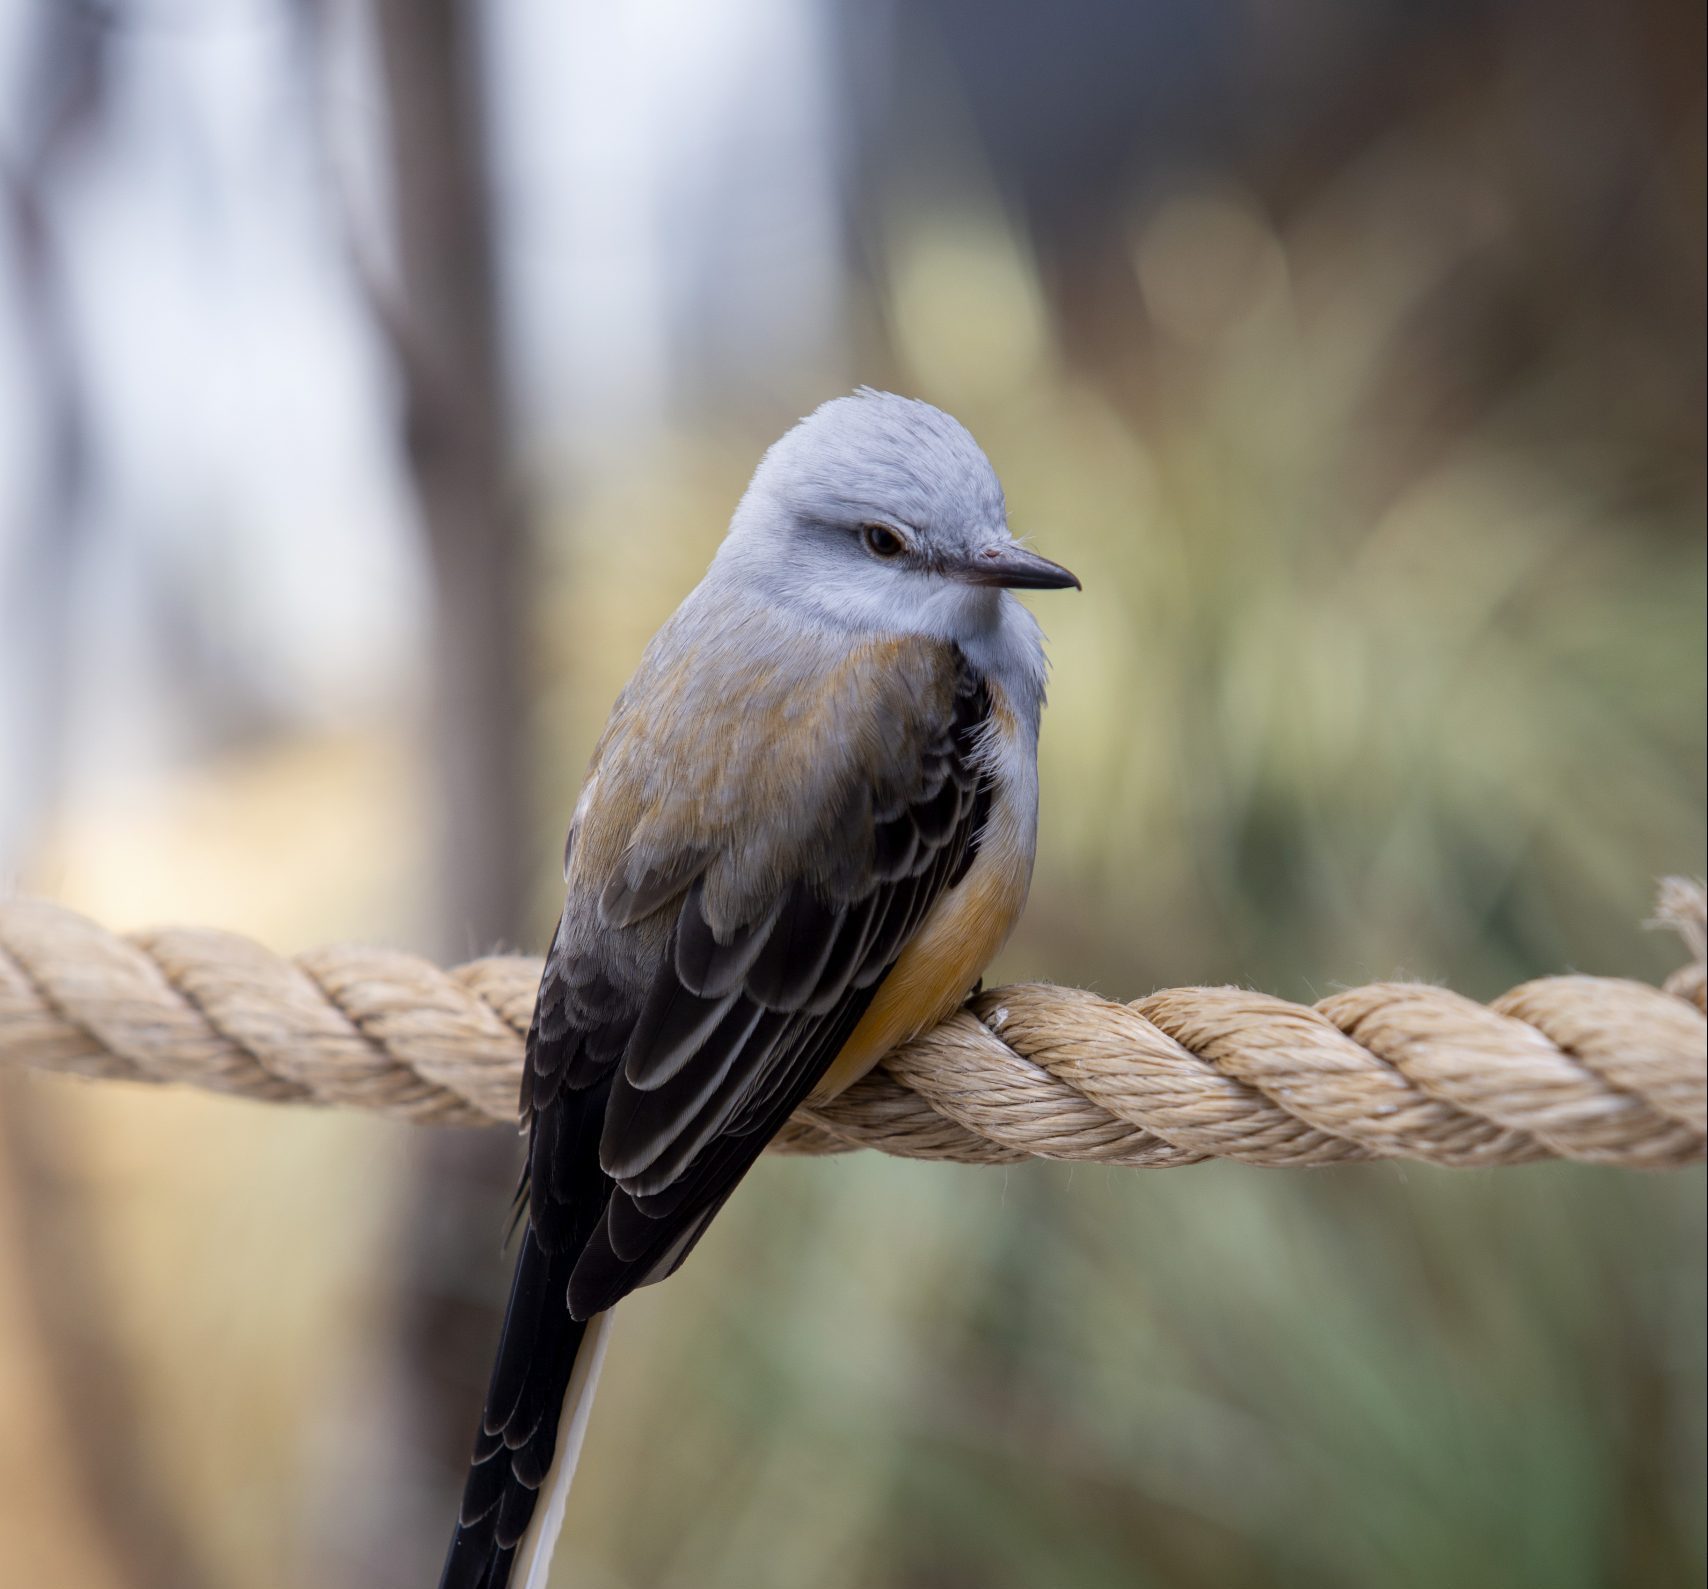 Scissor-tailed Flycatcher perched on a rope